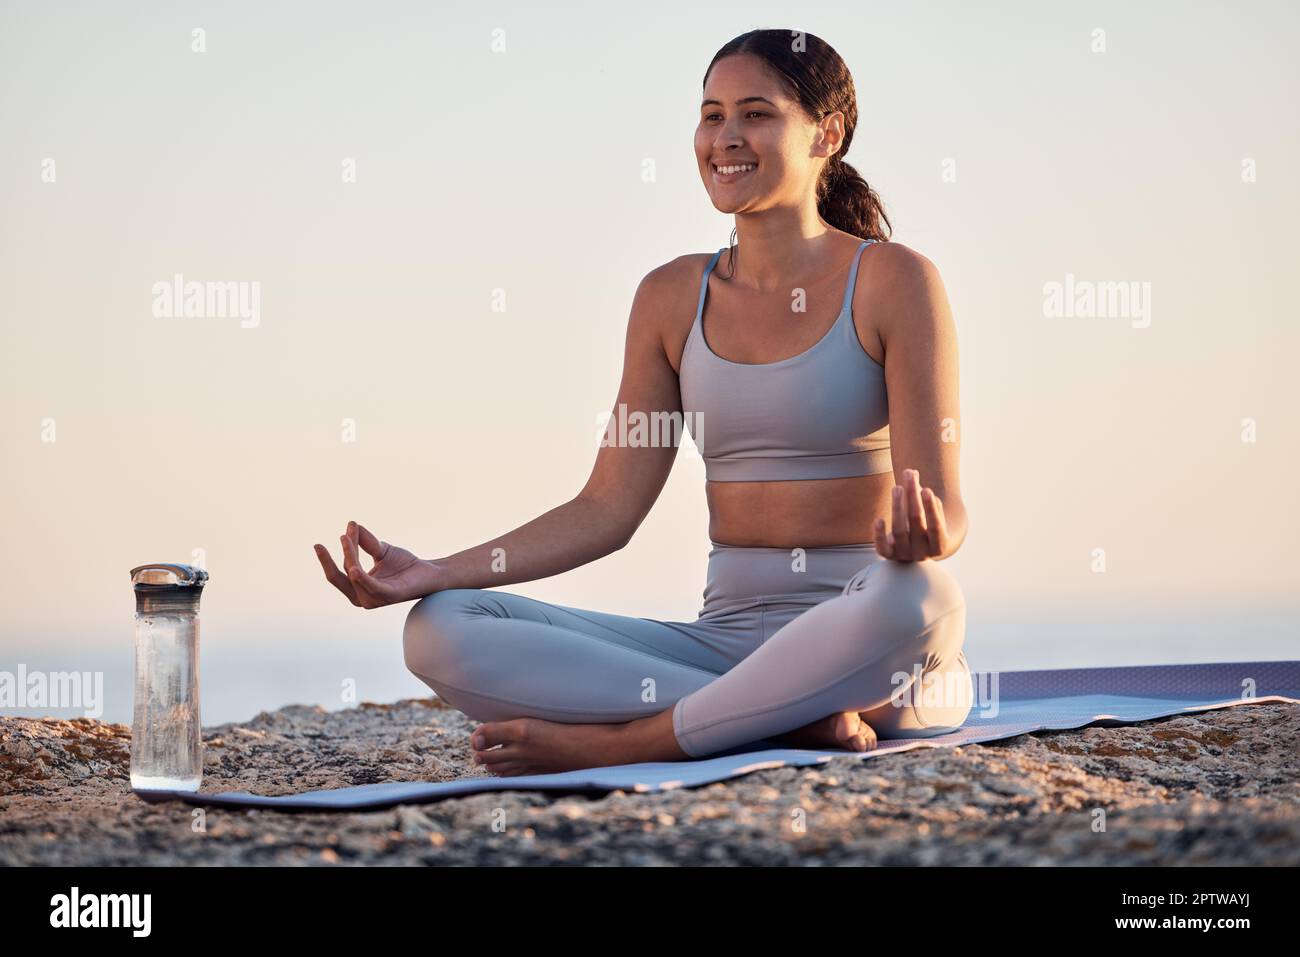 zen meditation, woman and relax outdoor for healthcare wellness, mindfulness or chakra energy health. Reiki, yoga fitness training and healthy mindset Stock Photo